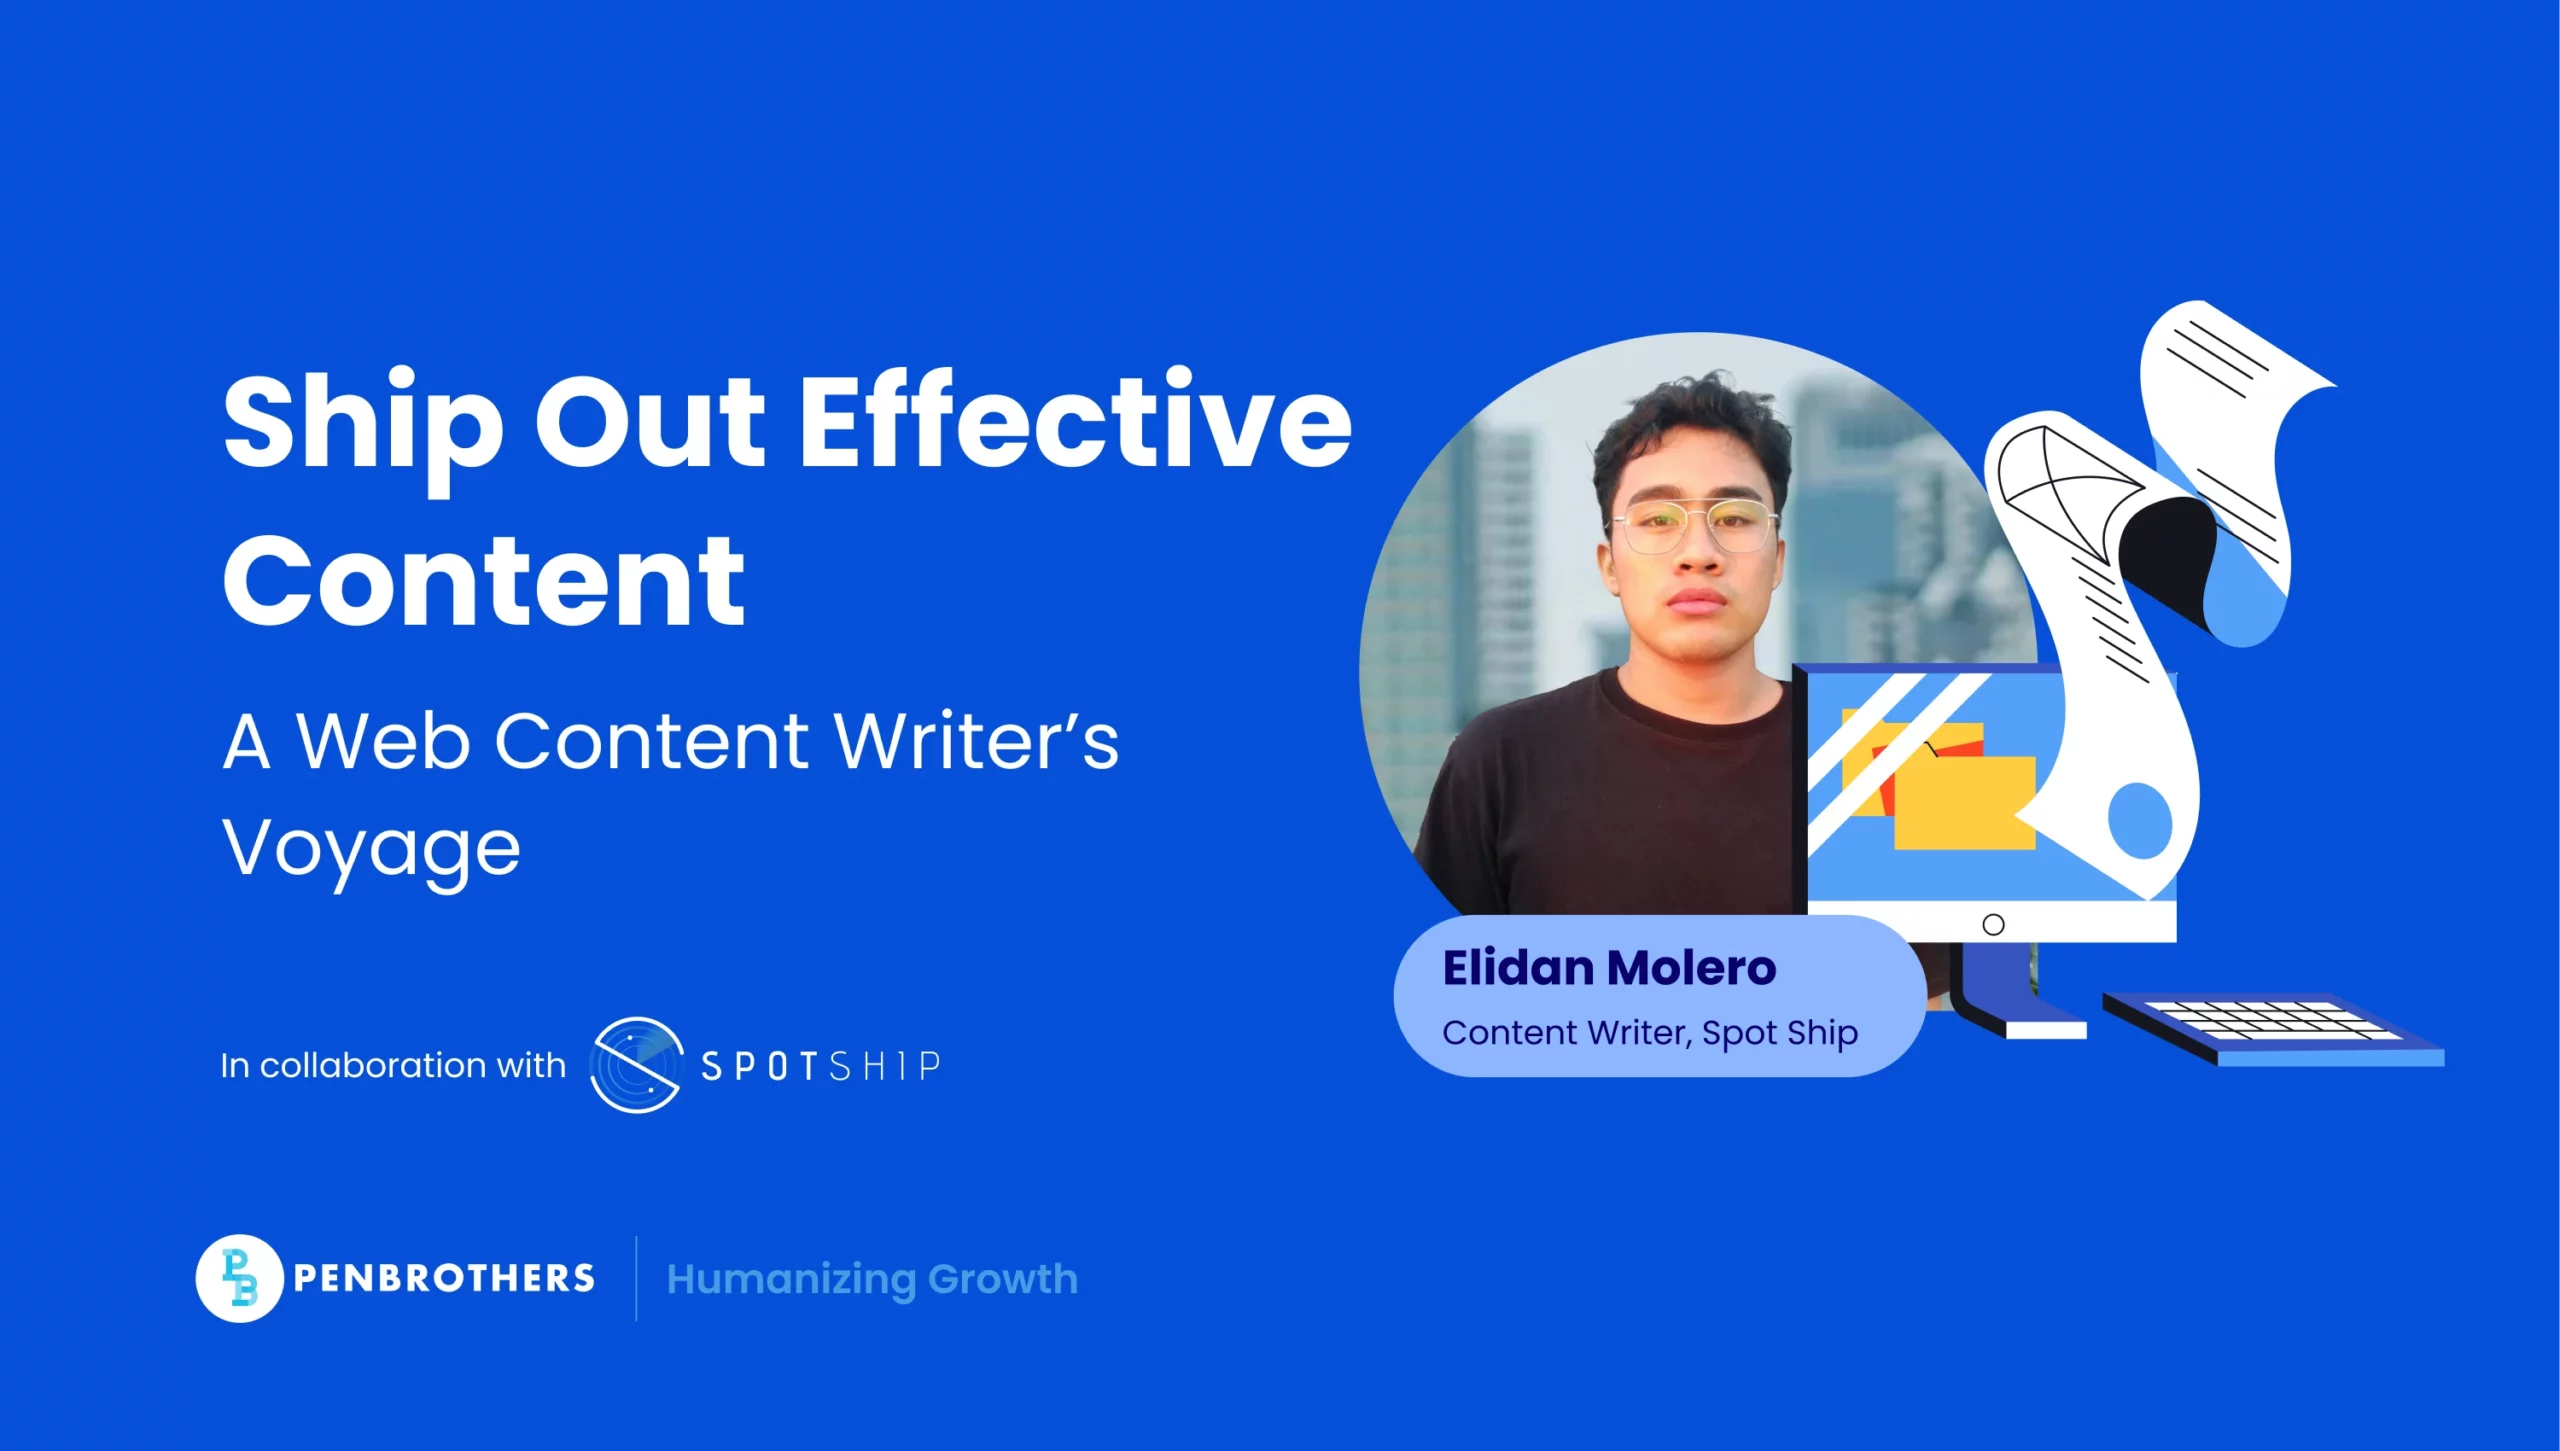 Ship Out Effective Content: A Web Content Writer’s Voyage